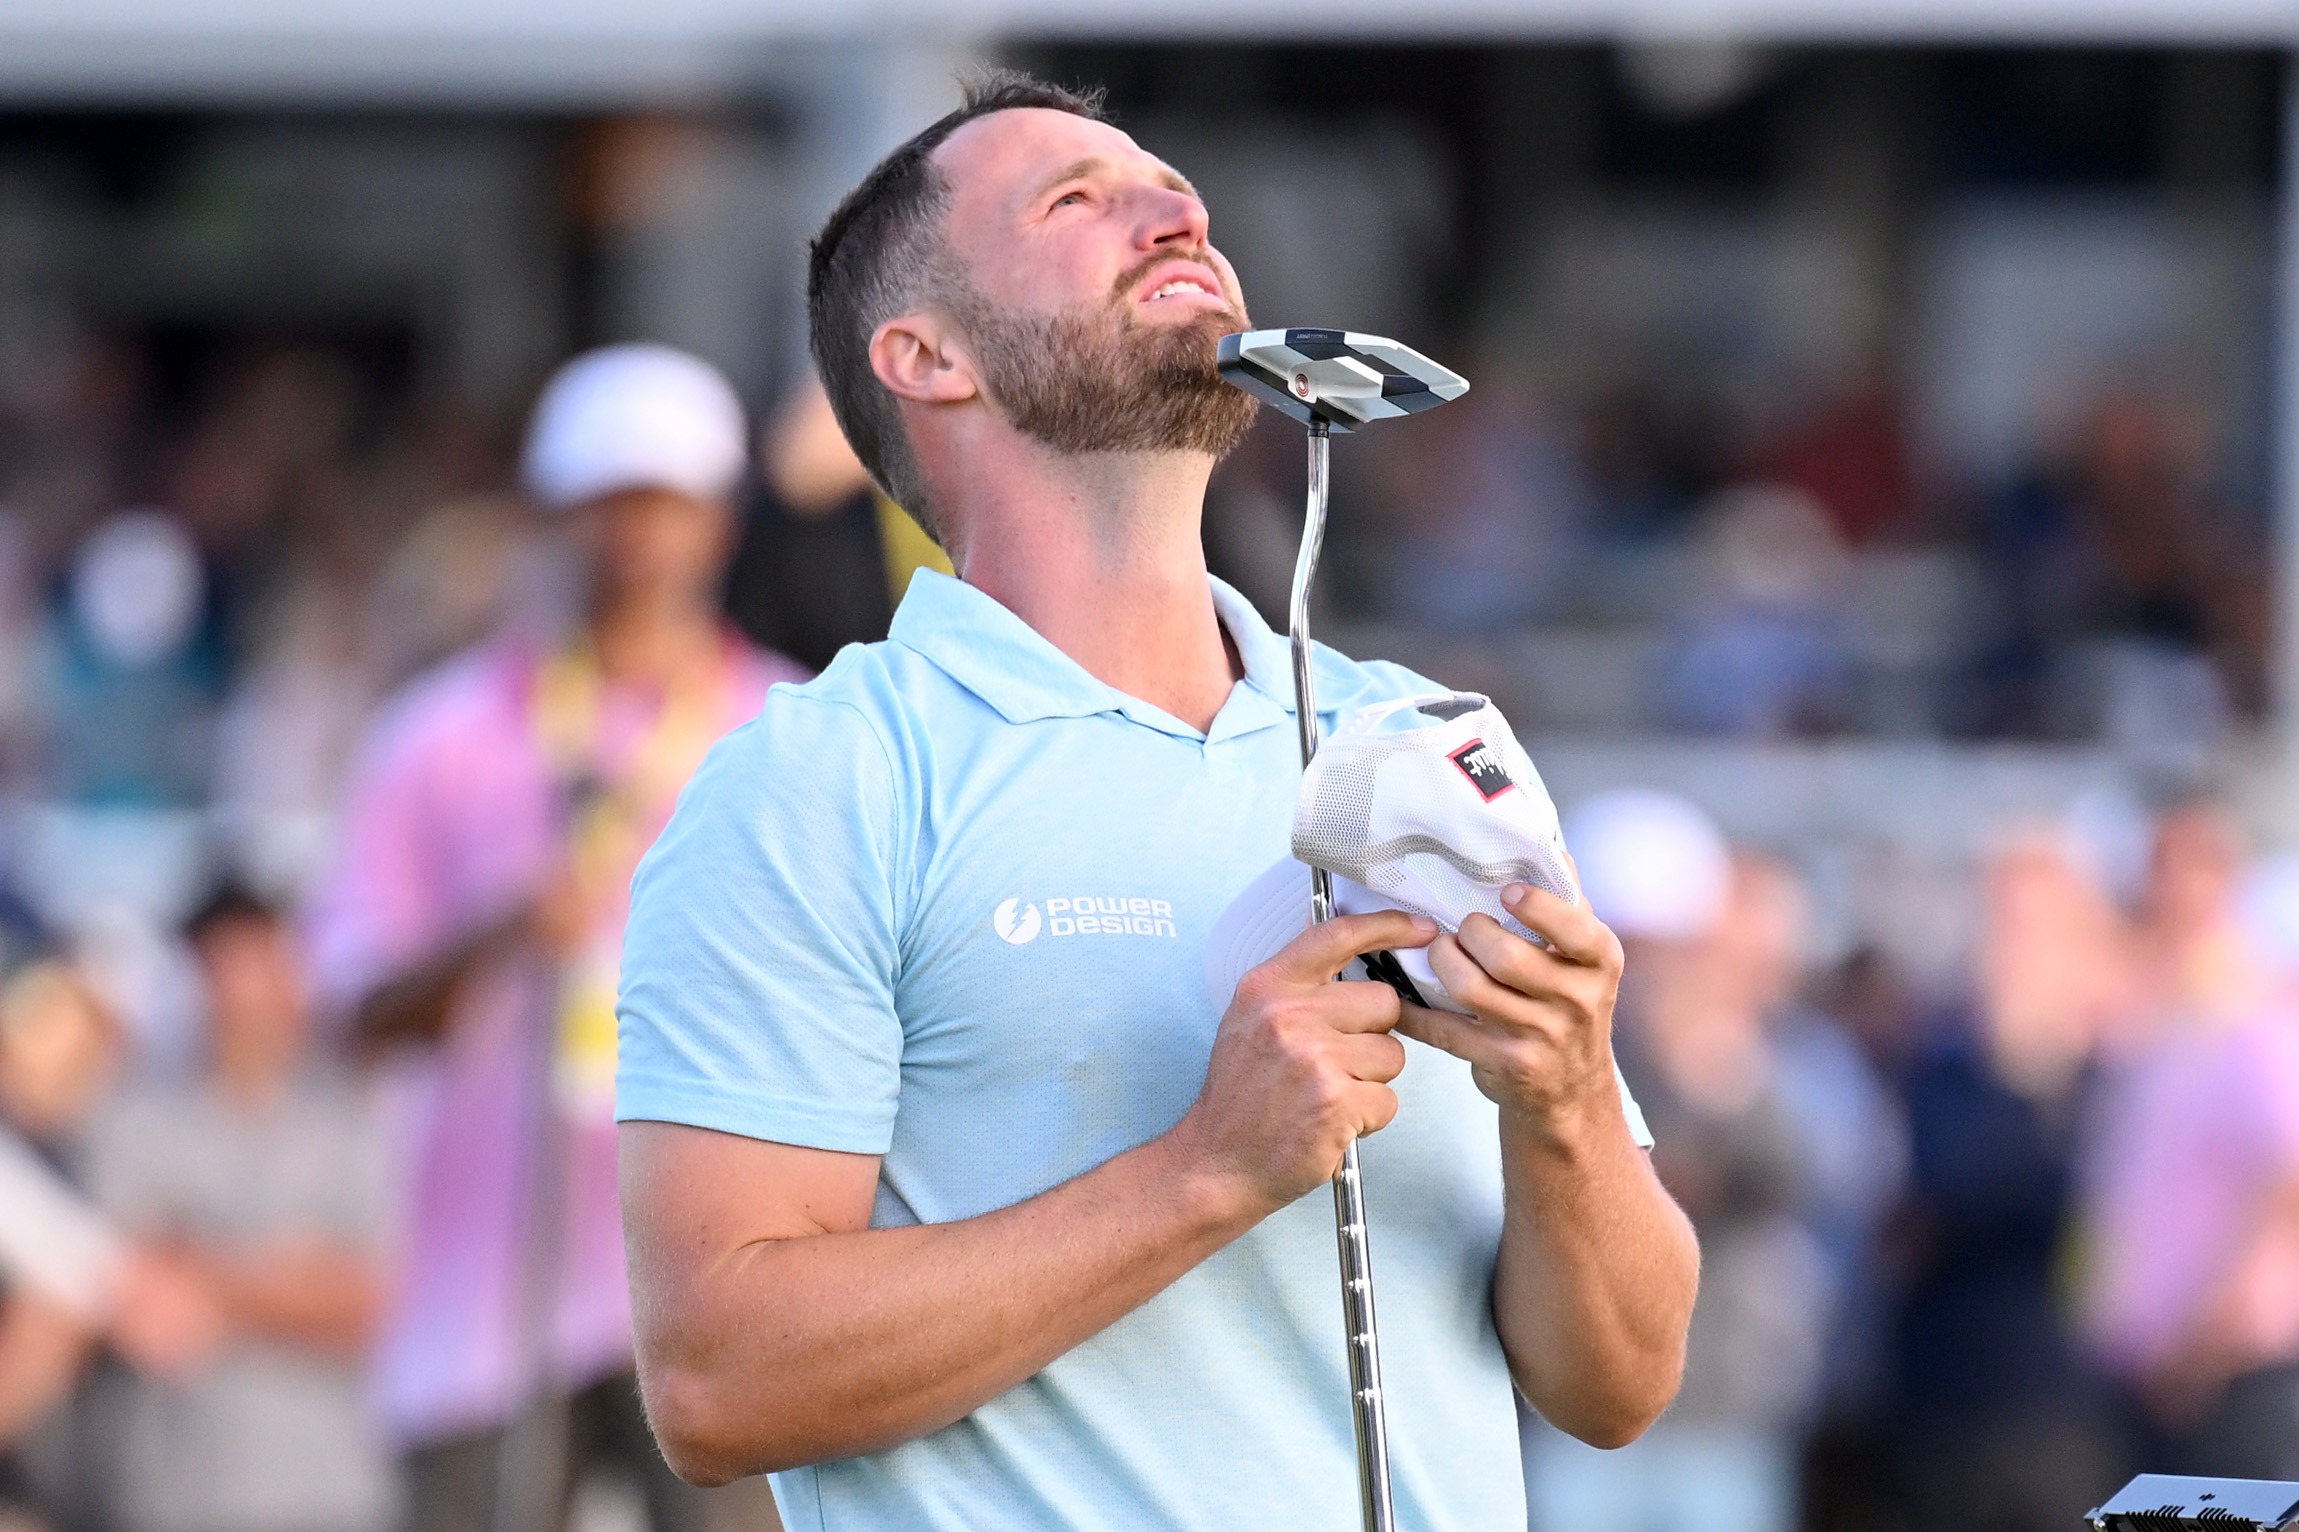 LOS ANGELES, CALIFORNIA - JUNE 18: Wyndham Clark of the United States reacts to his winning putt on the 18th green during the final round of the 123rd U.S. Open Championship at The Los Angeles Country Club on June 18, 2023 in Los Angeles, California. (Photo by Ross Kinnaird/Getty Images)